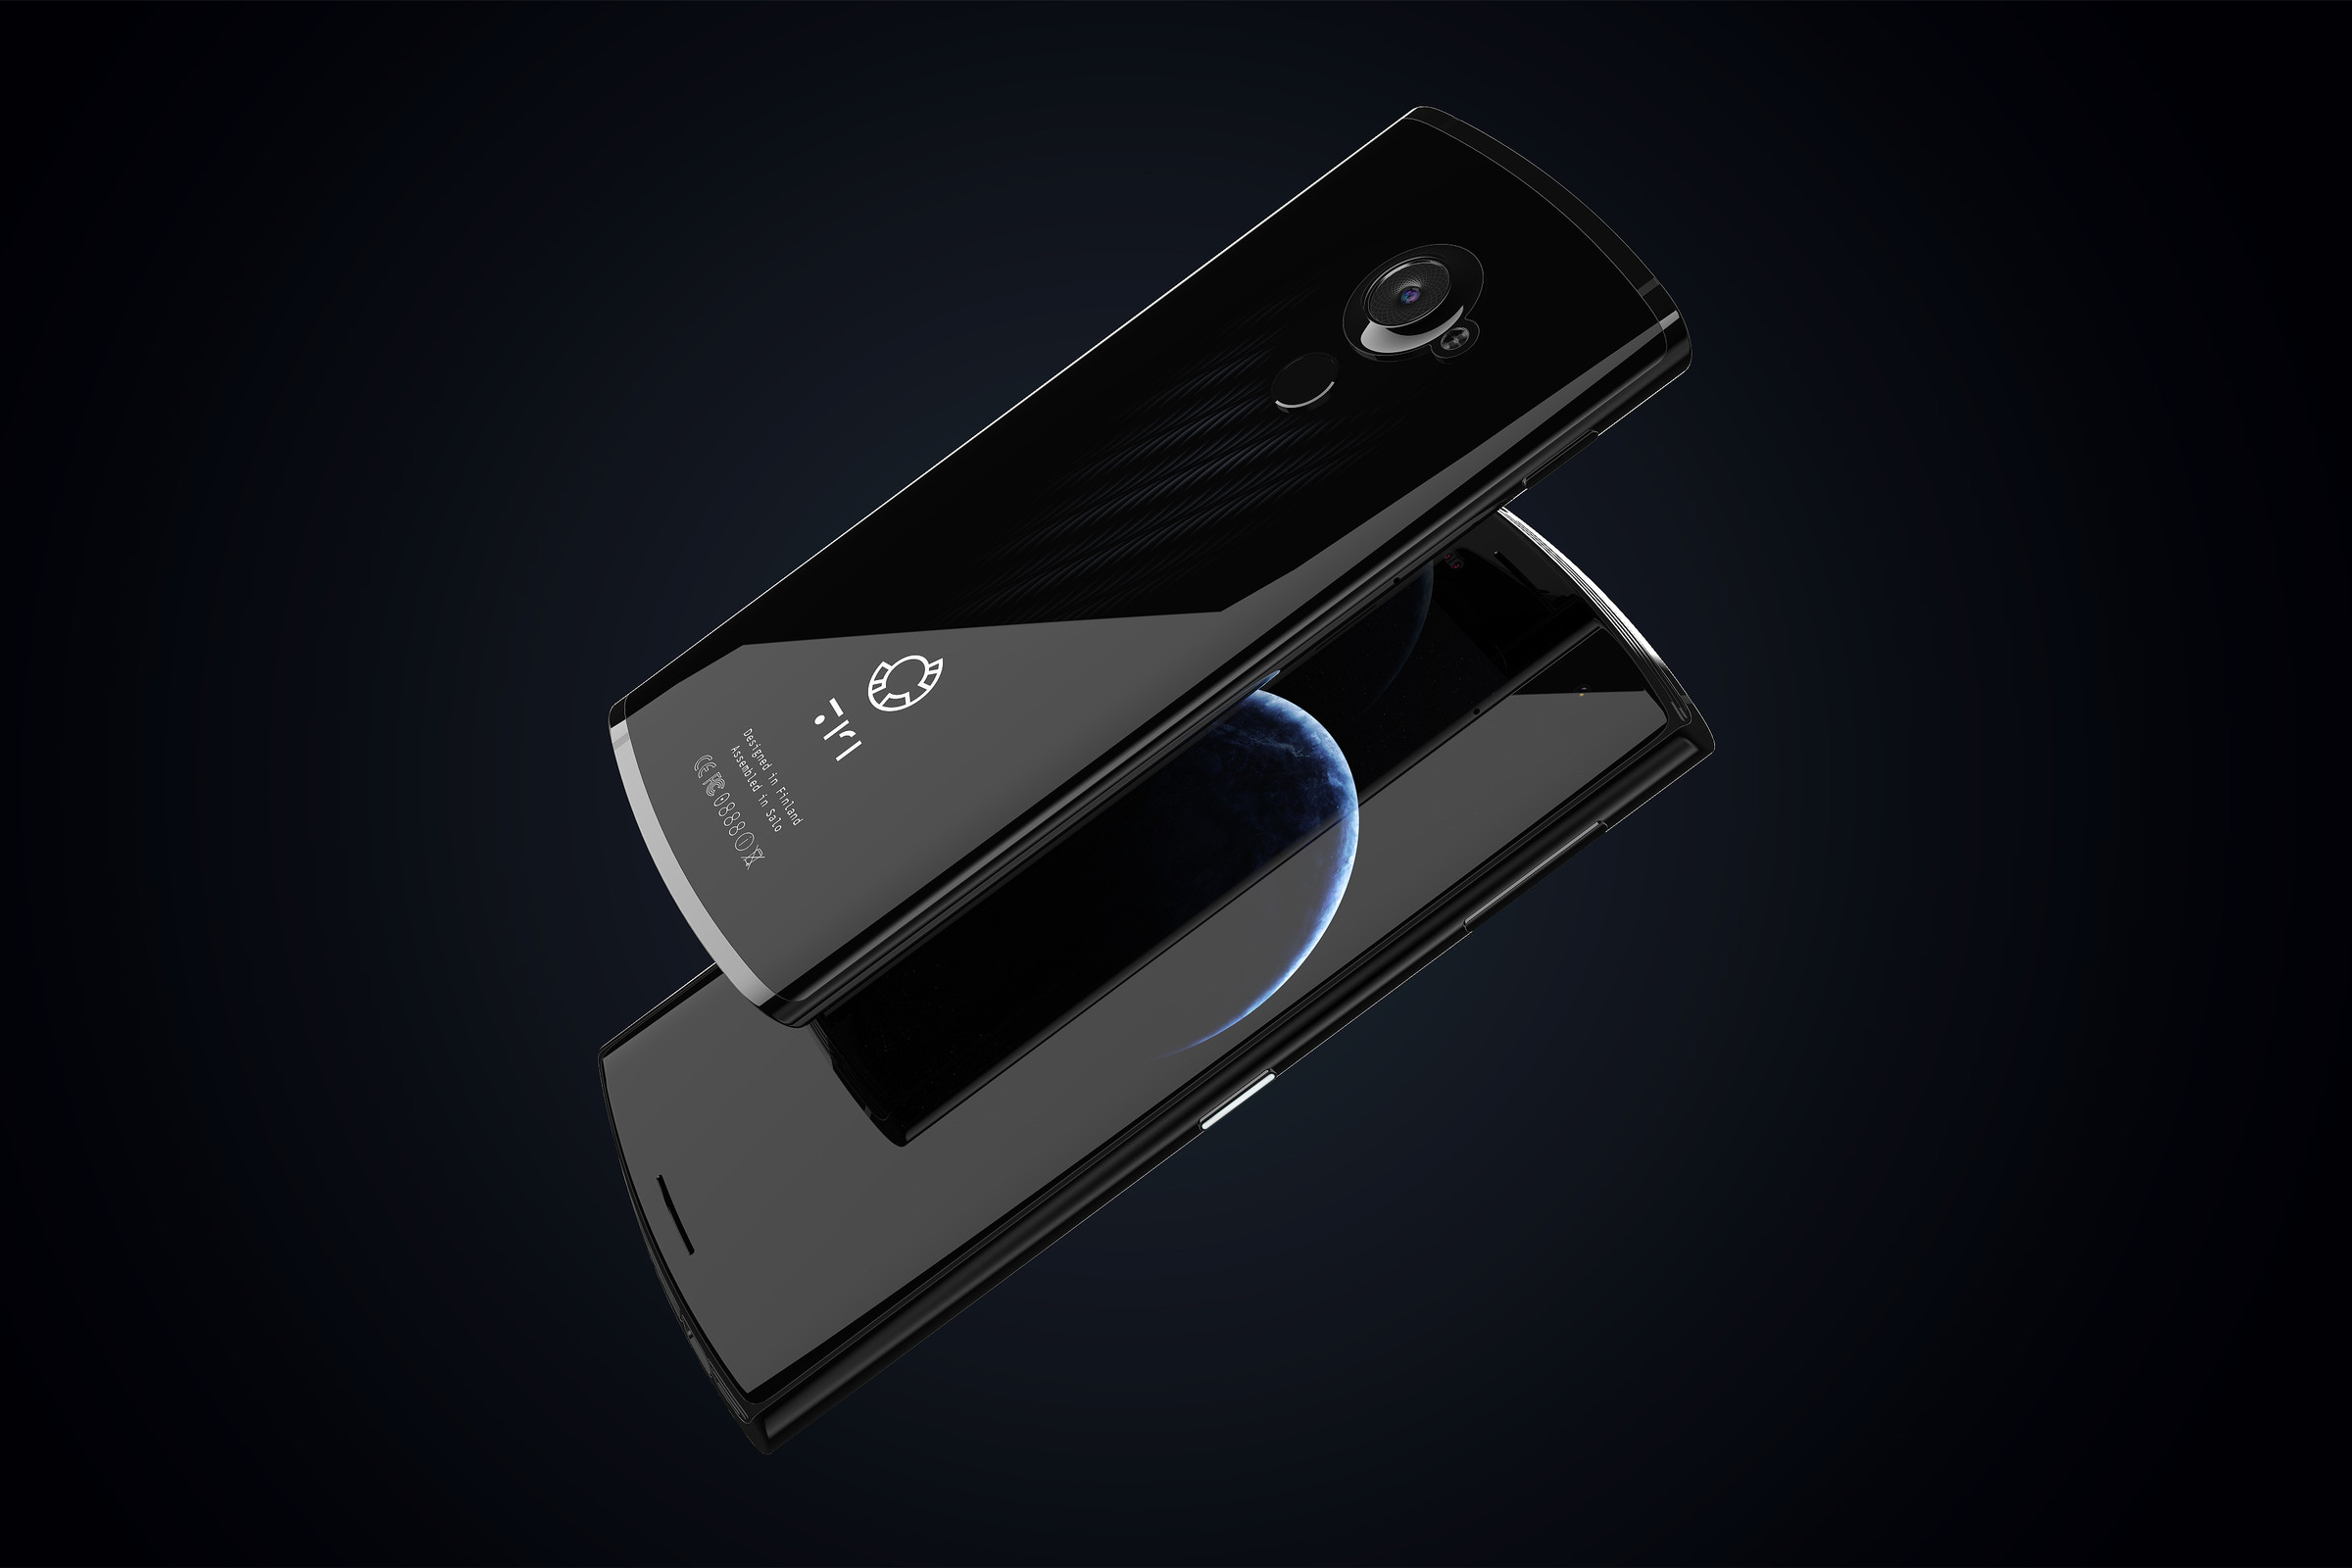 A render of the Turing Phone Appassionato